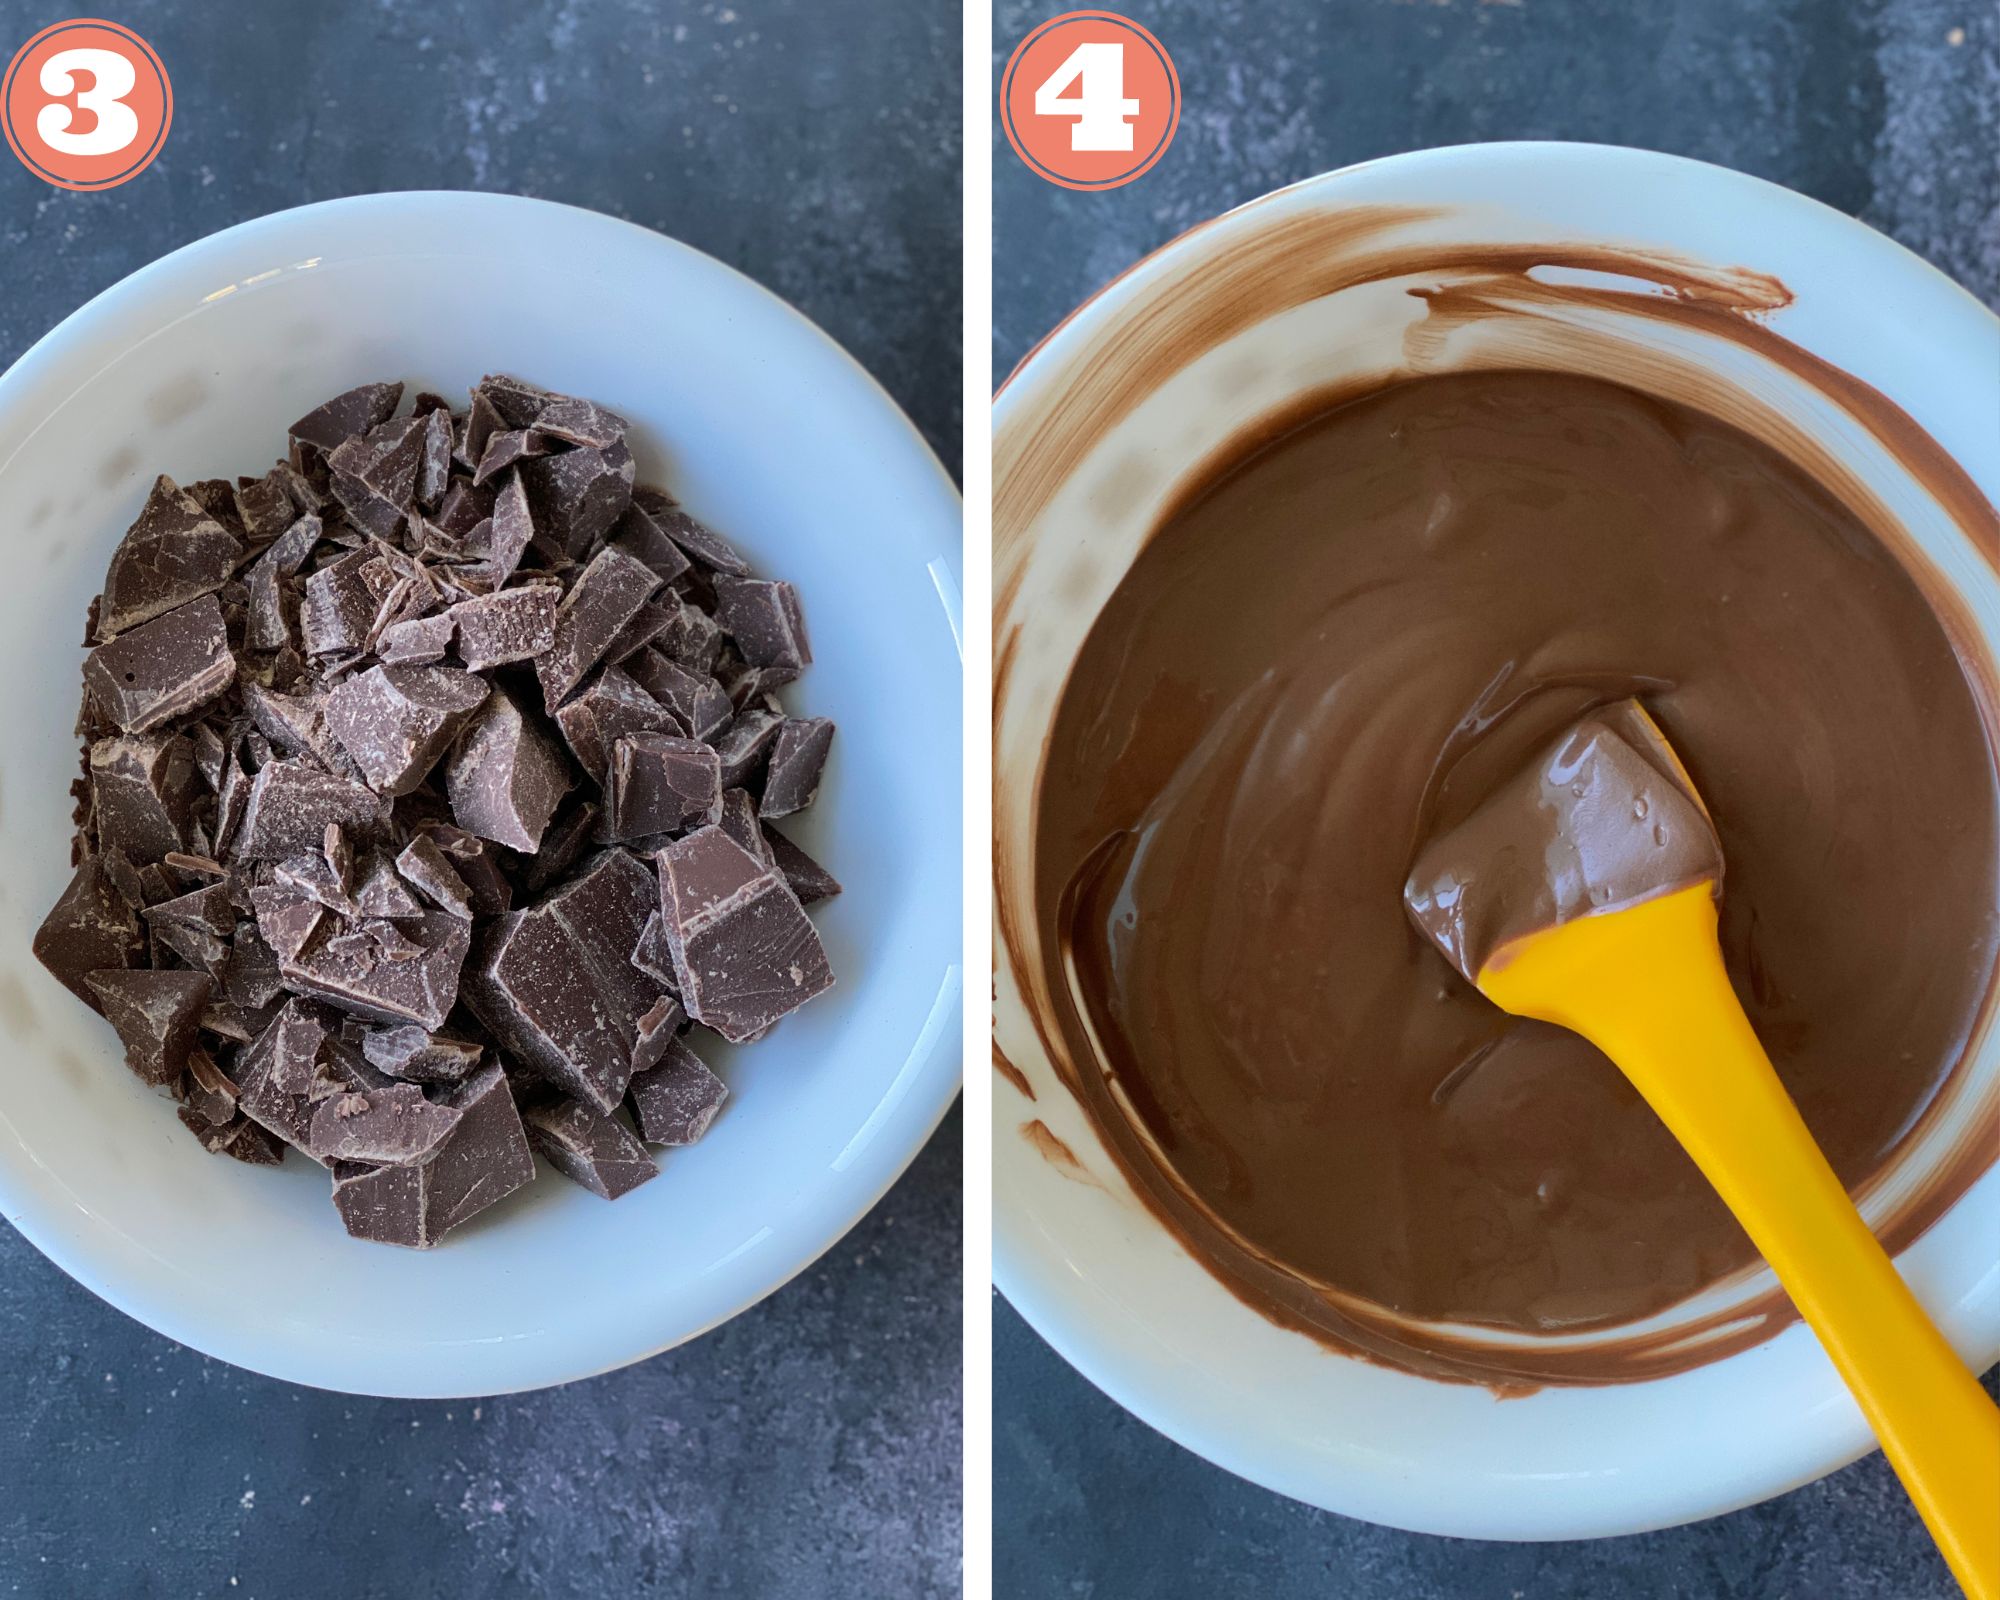 Chop the chocolate and melt it till smooth. Set aside. 